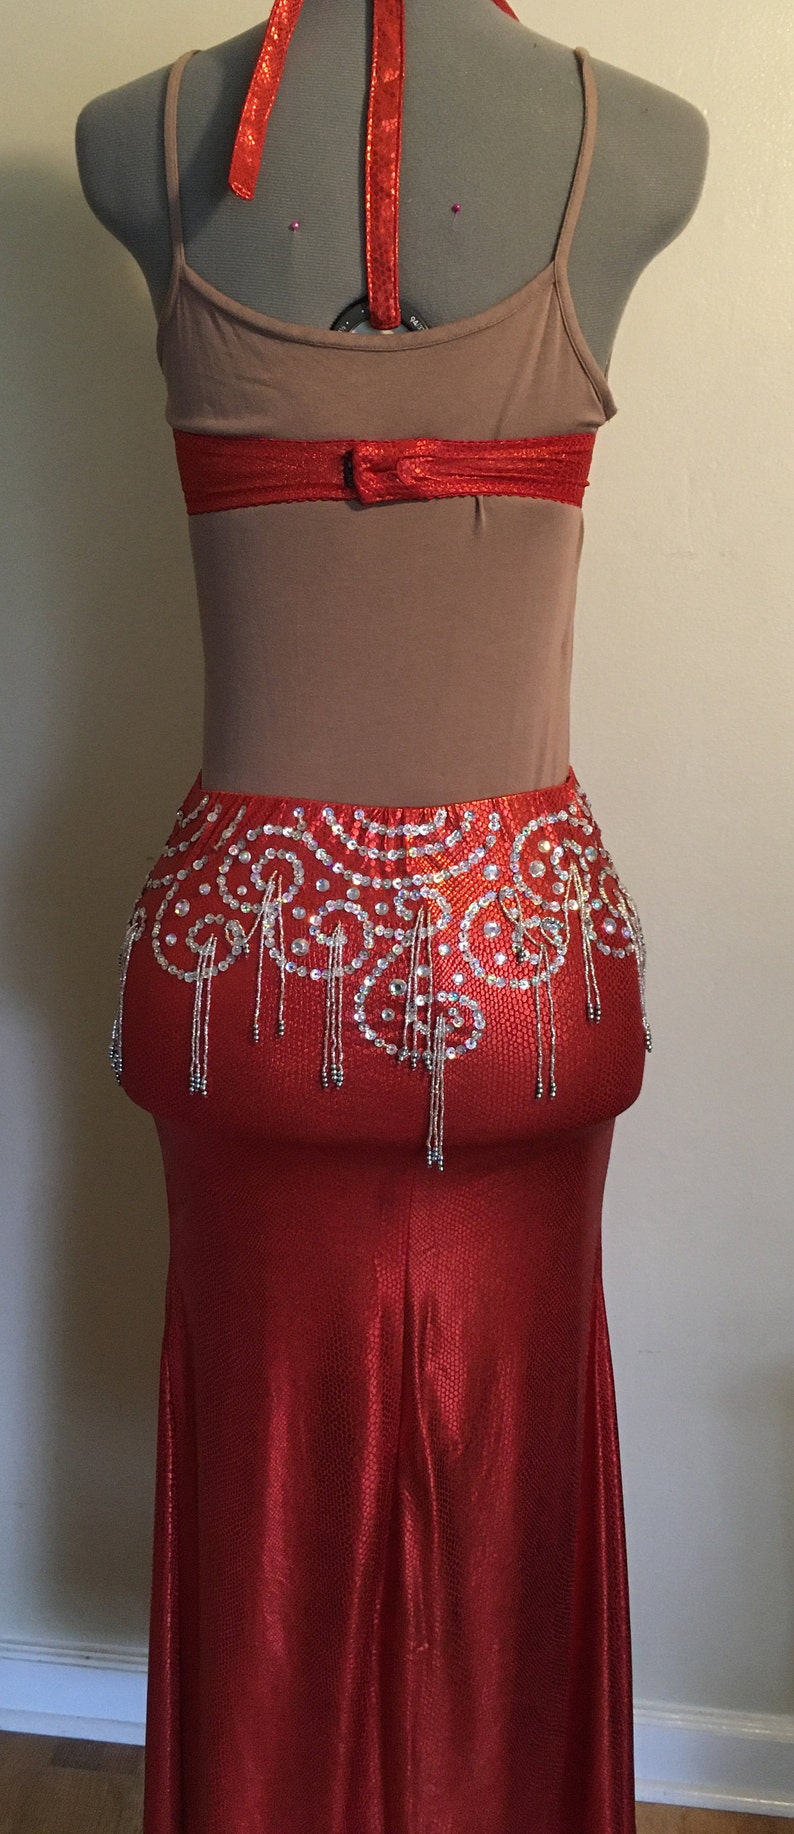 Red Cabaret Belly dance Costume with sequins and beaded fringe | Etsy